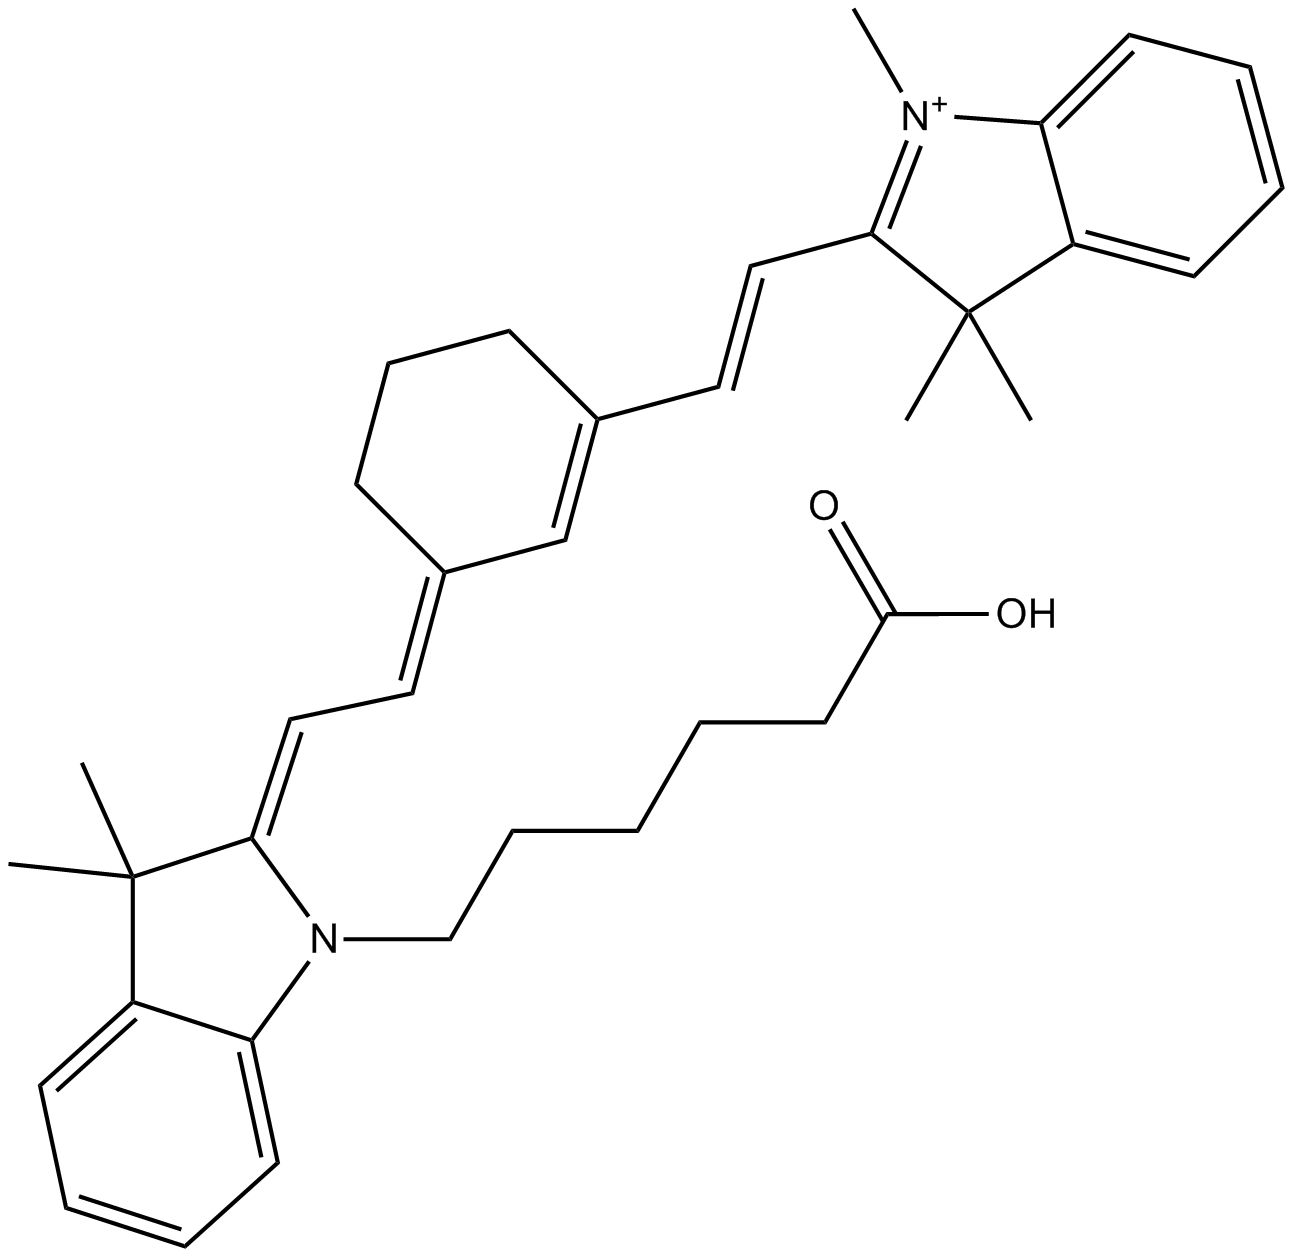 Cy7 carboxylic acid (non-sulfonated) Chemical Structure